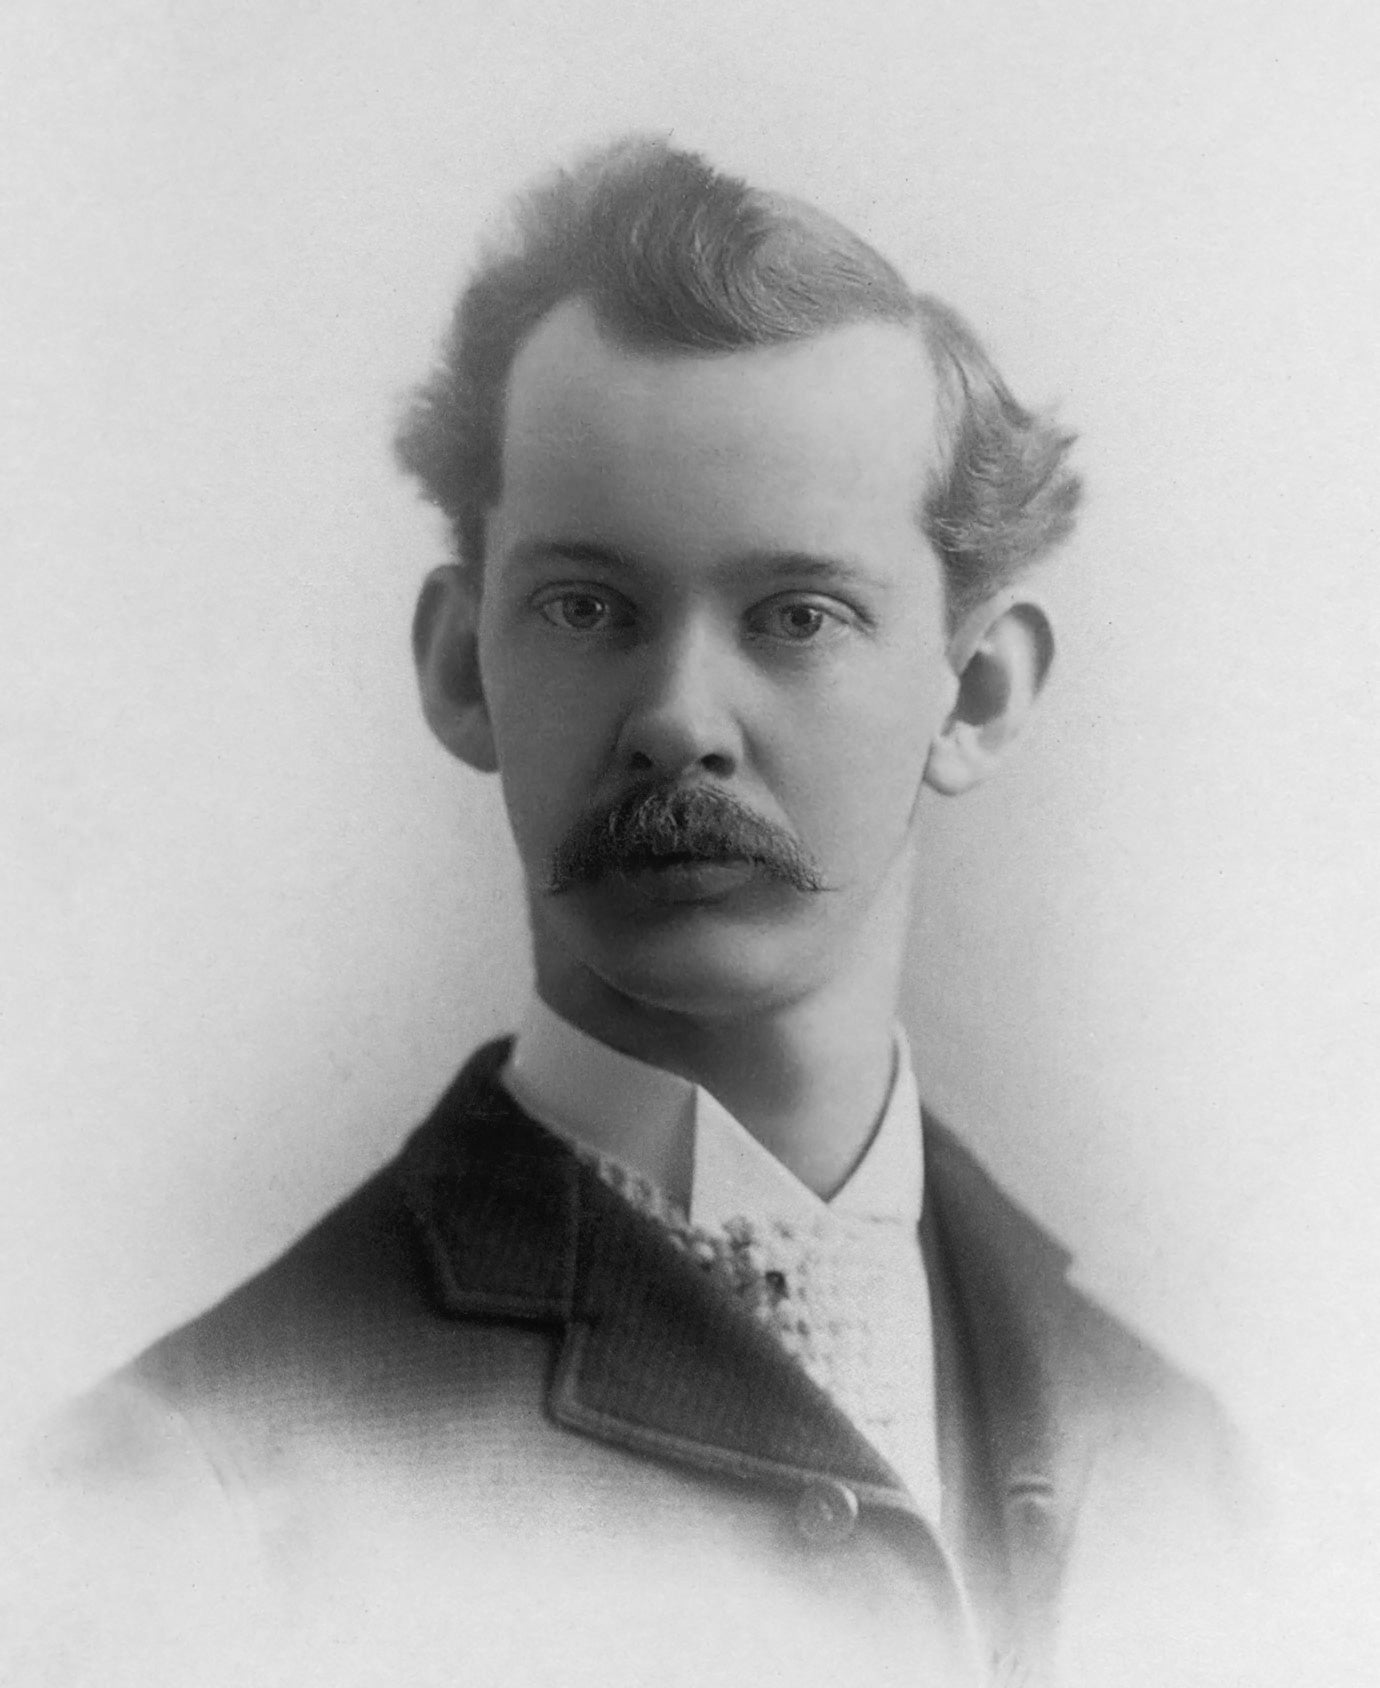 Chilli Seeds NZ A photograph of Wilbur Scoville inventor of the Scoville scale.